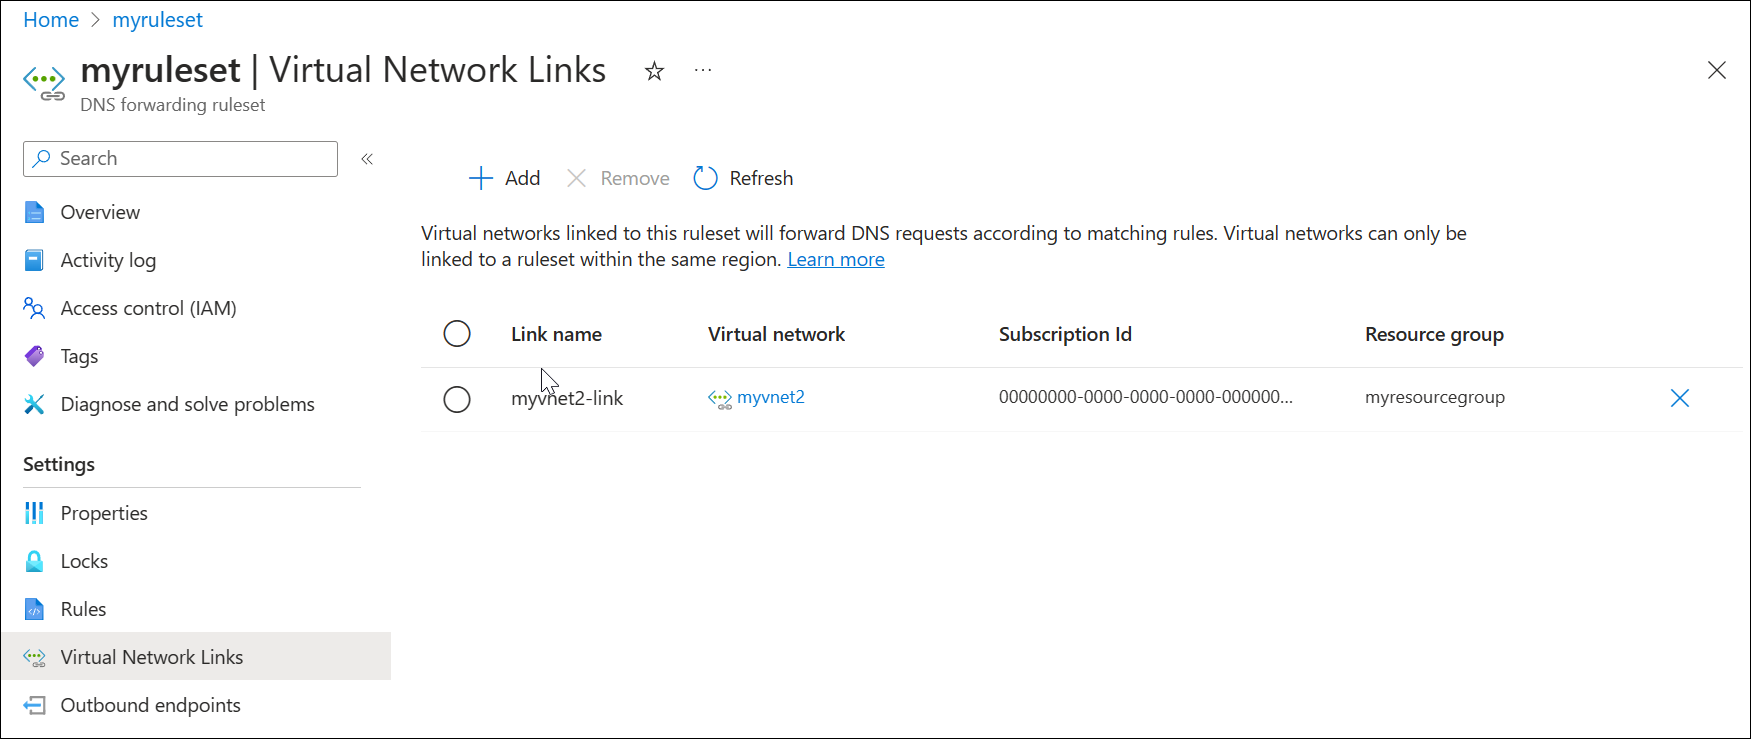 Screenshot of ruleset virtual network links after removing a link.